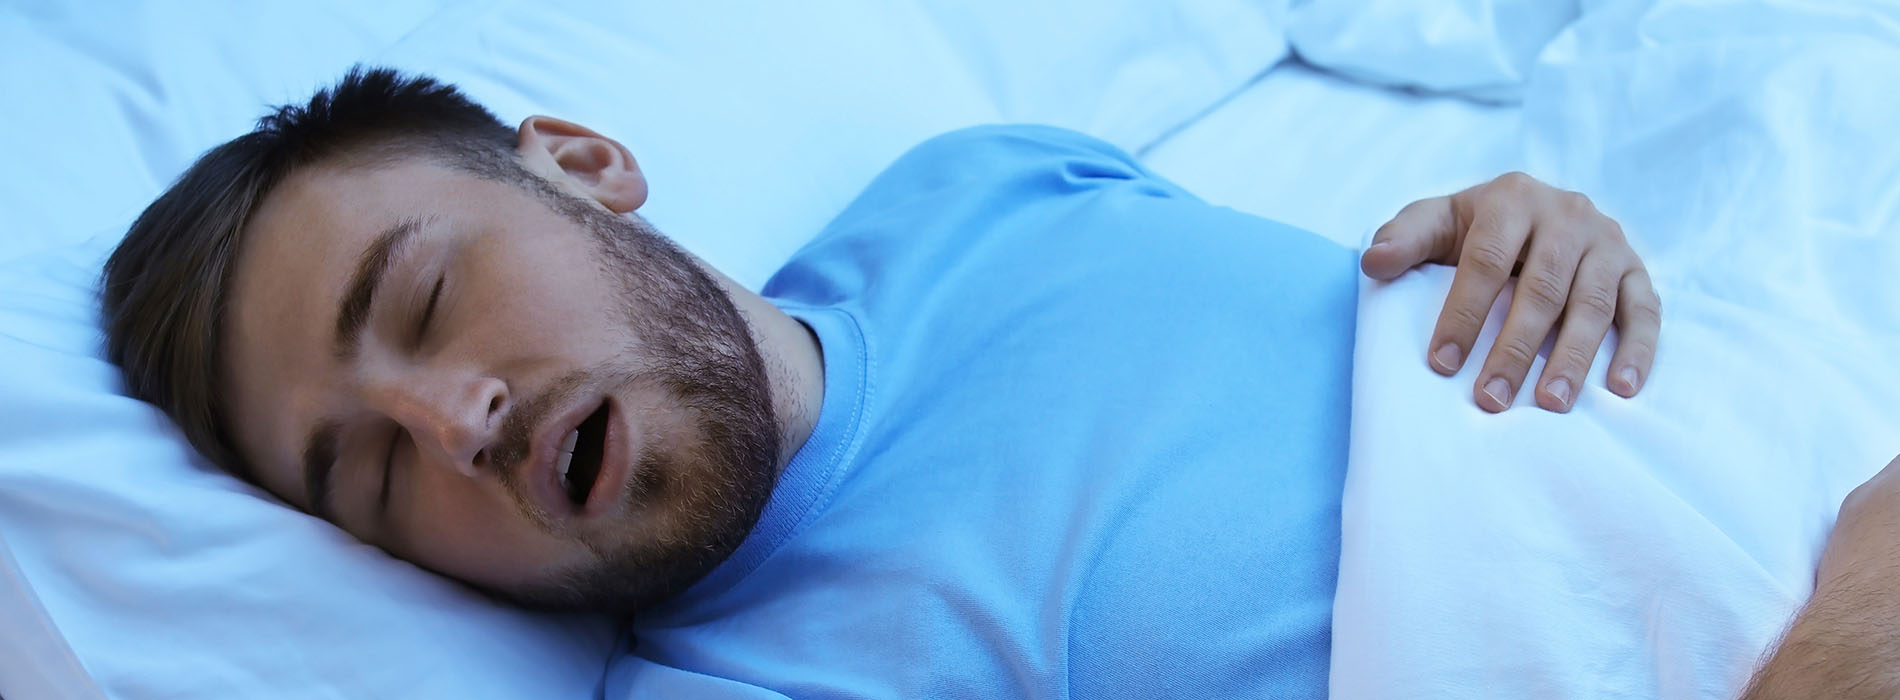 The image shows a man lying in bed with his mouth open, suggesting he is either asleep or in the midst of speaking or breathing.